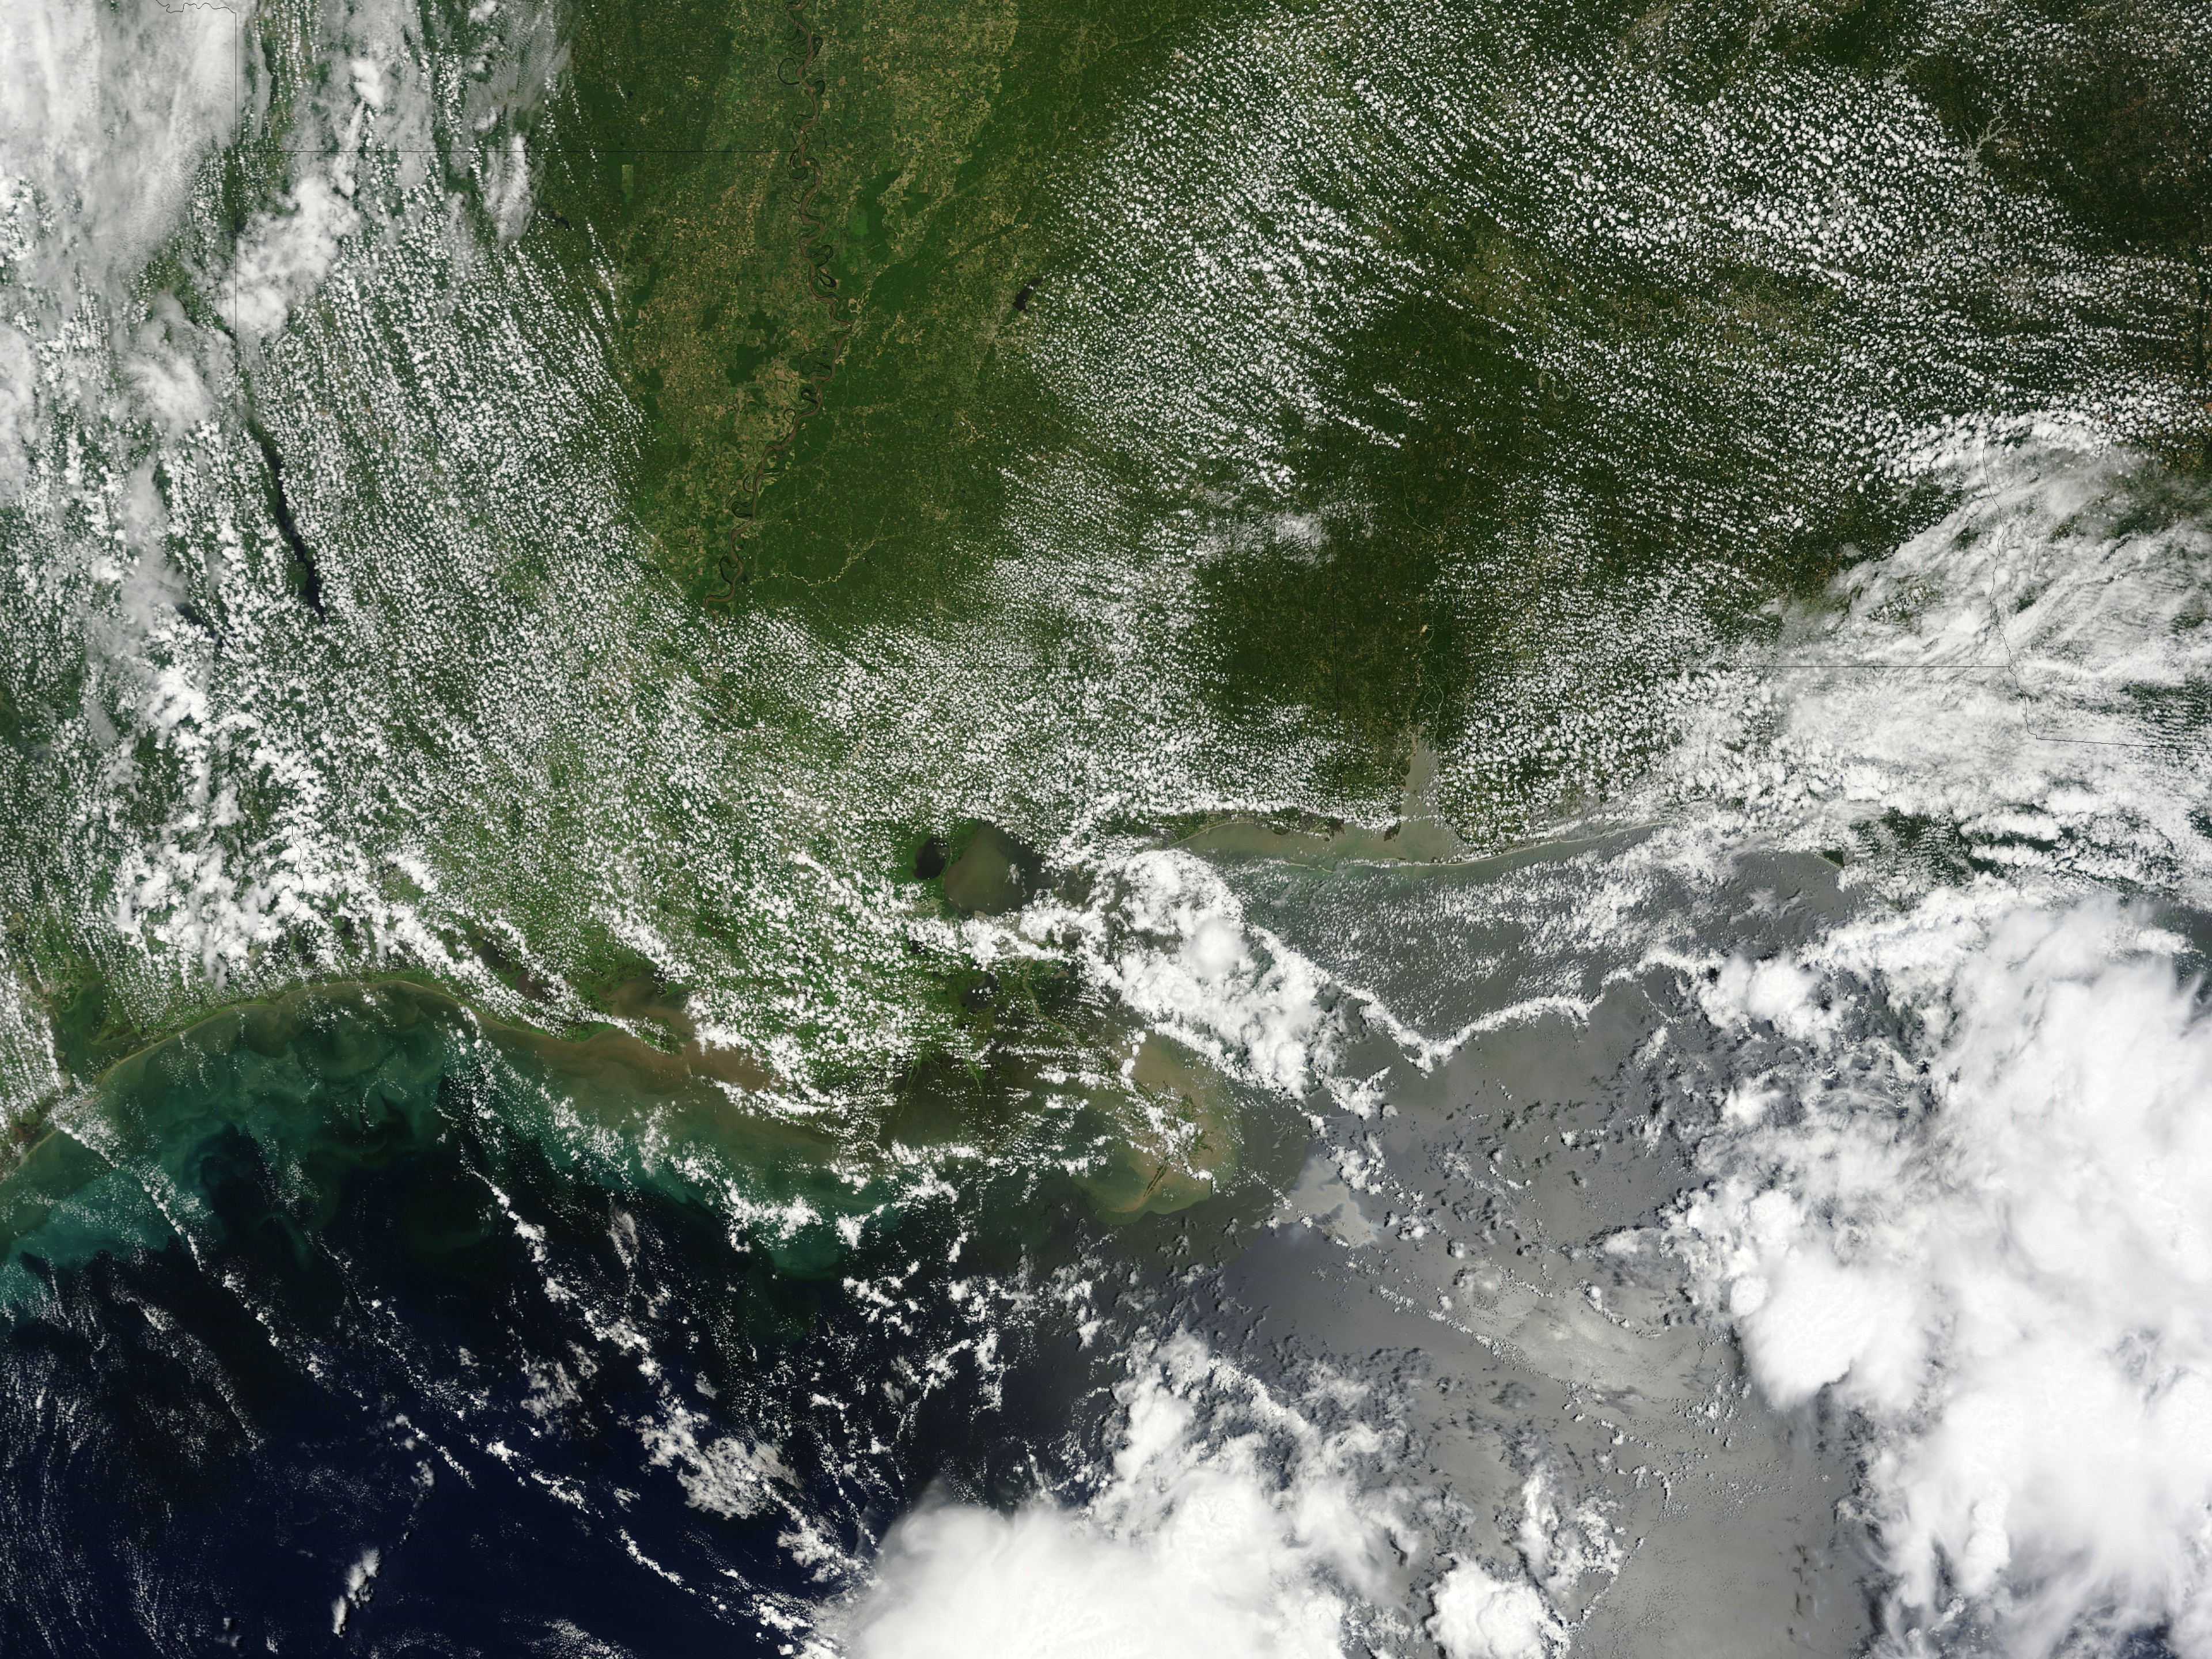 Oil Slick in the Gulf of Mexico - related image preview